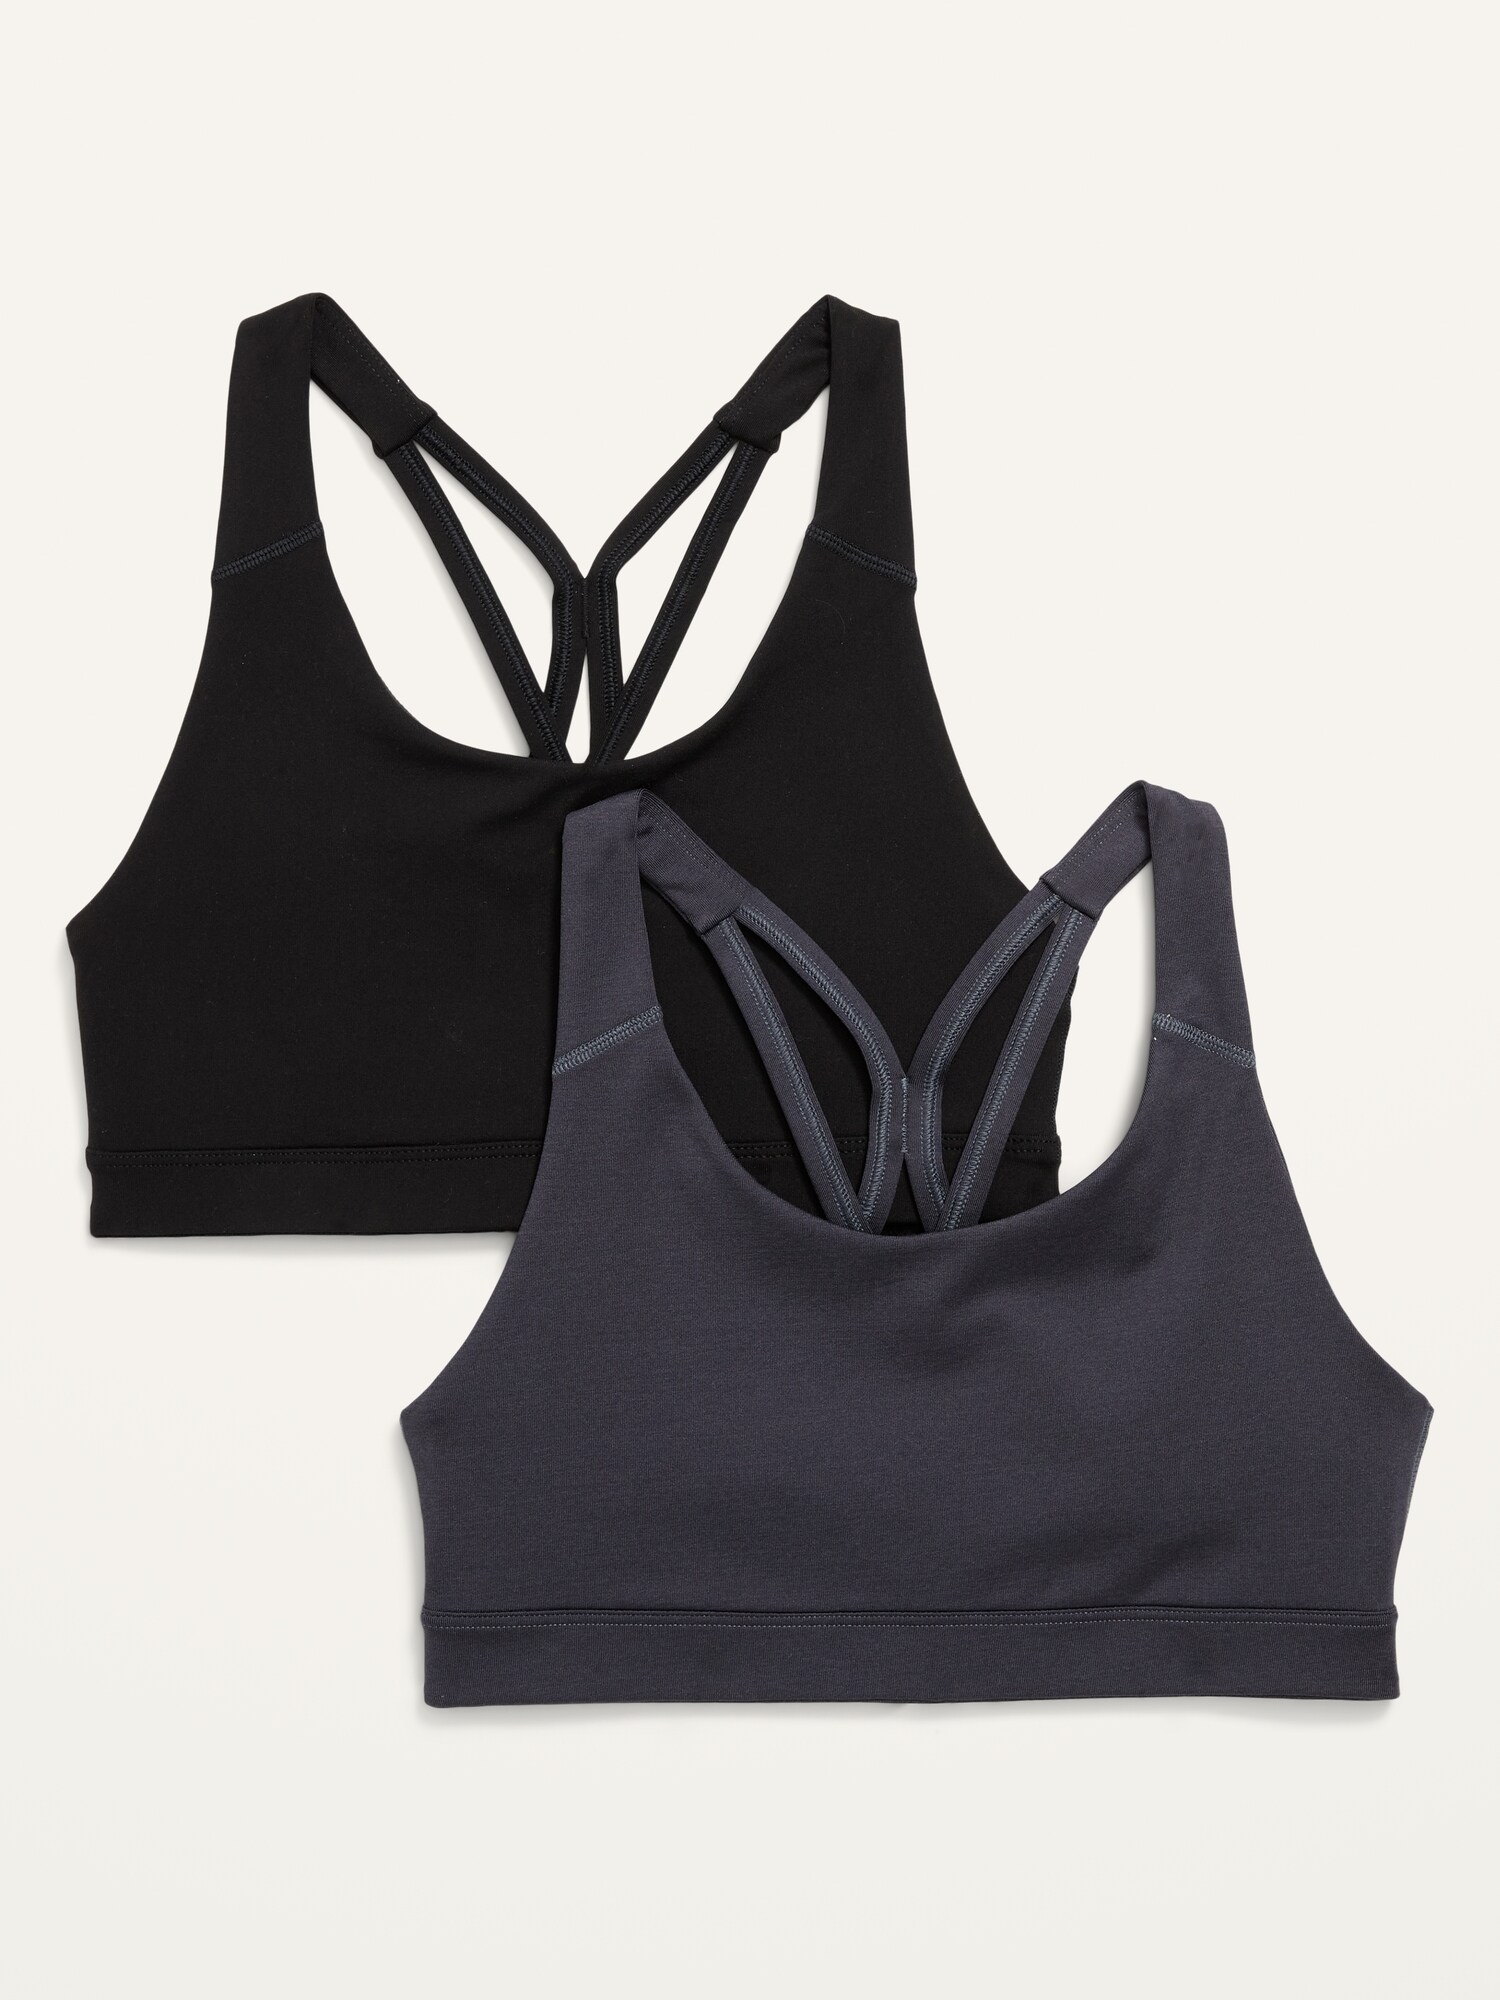 Medium Support Strappy Sports Bra 2-Pack for Women XS-XXL | Old Navy